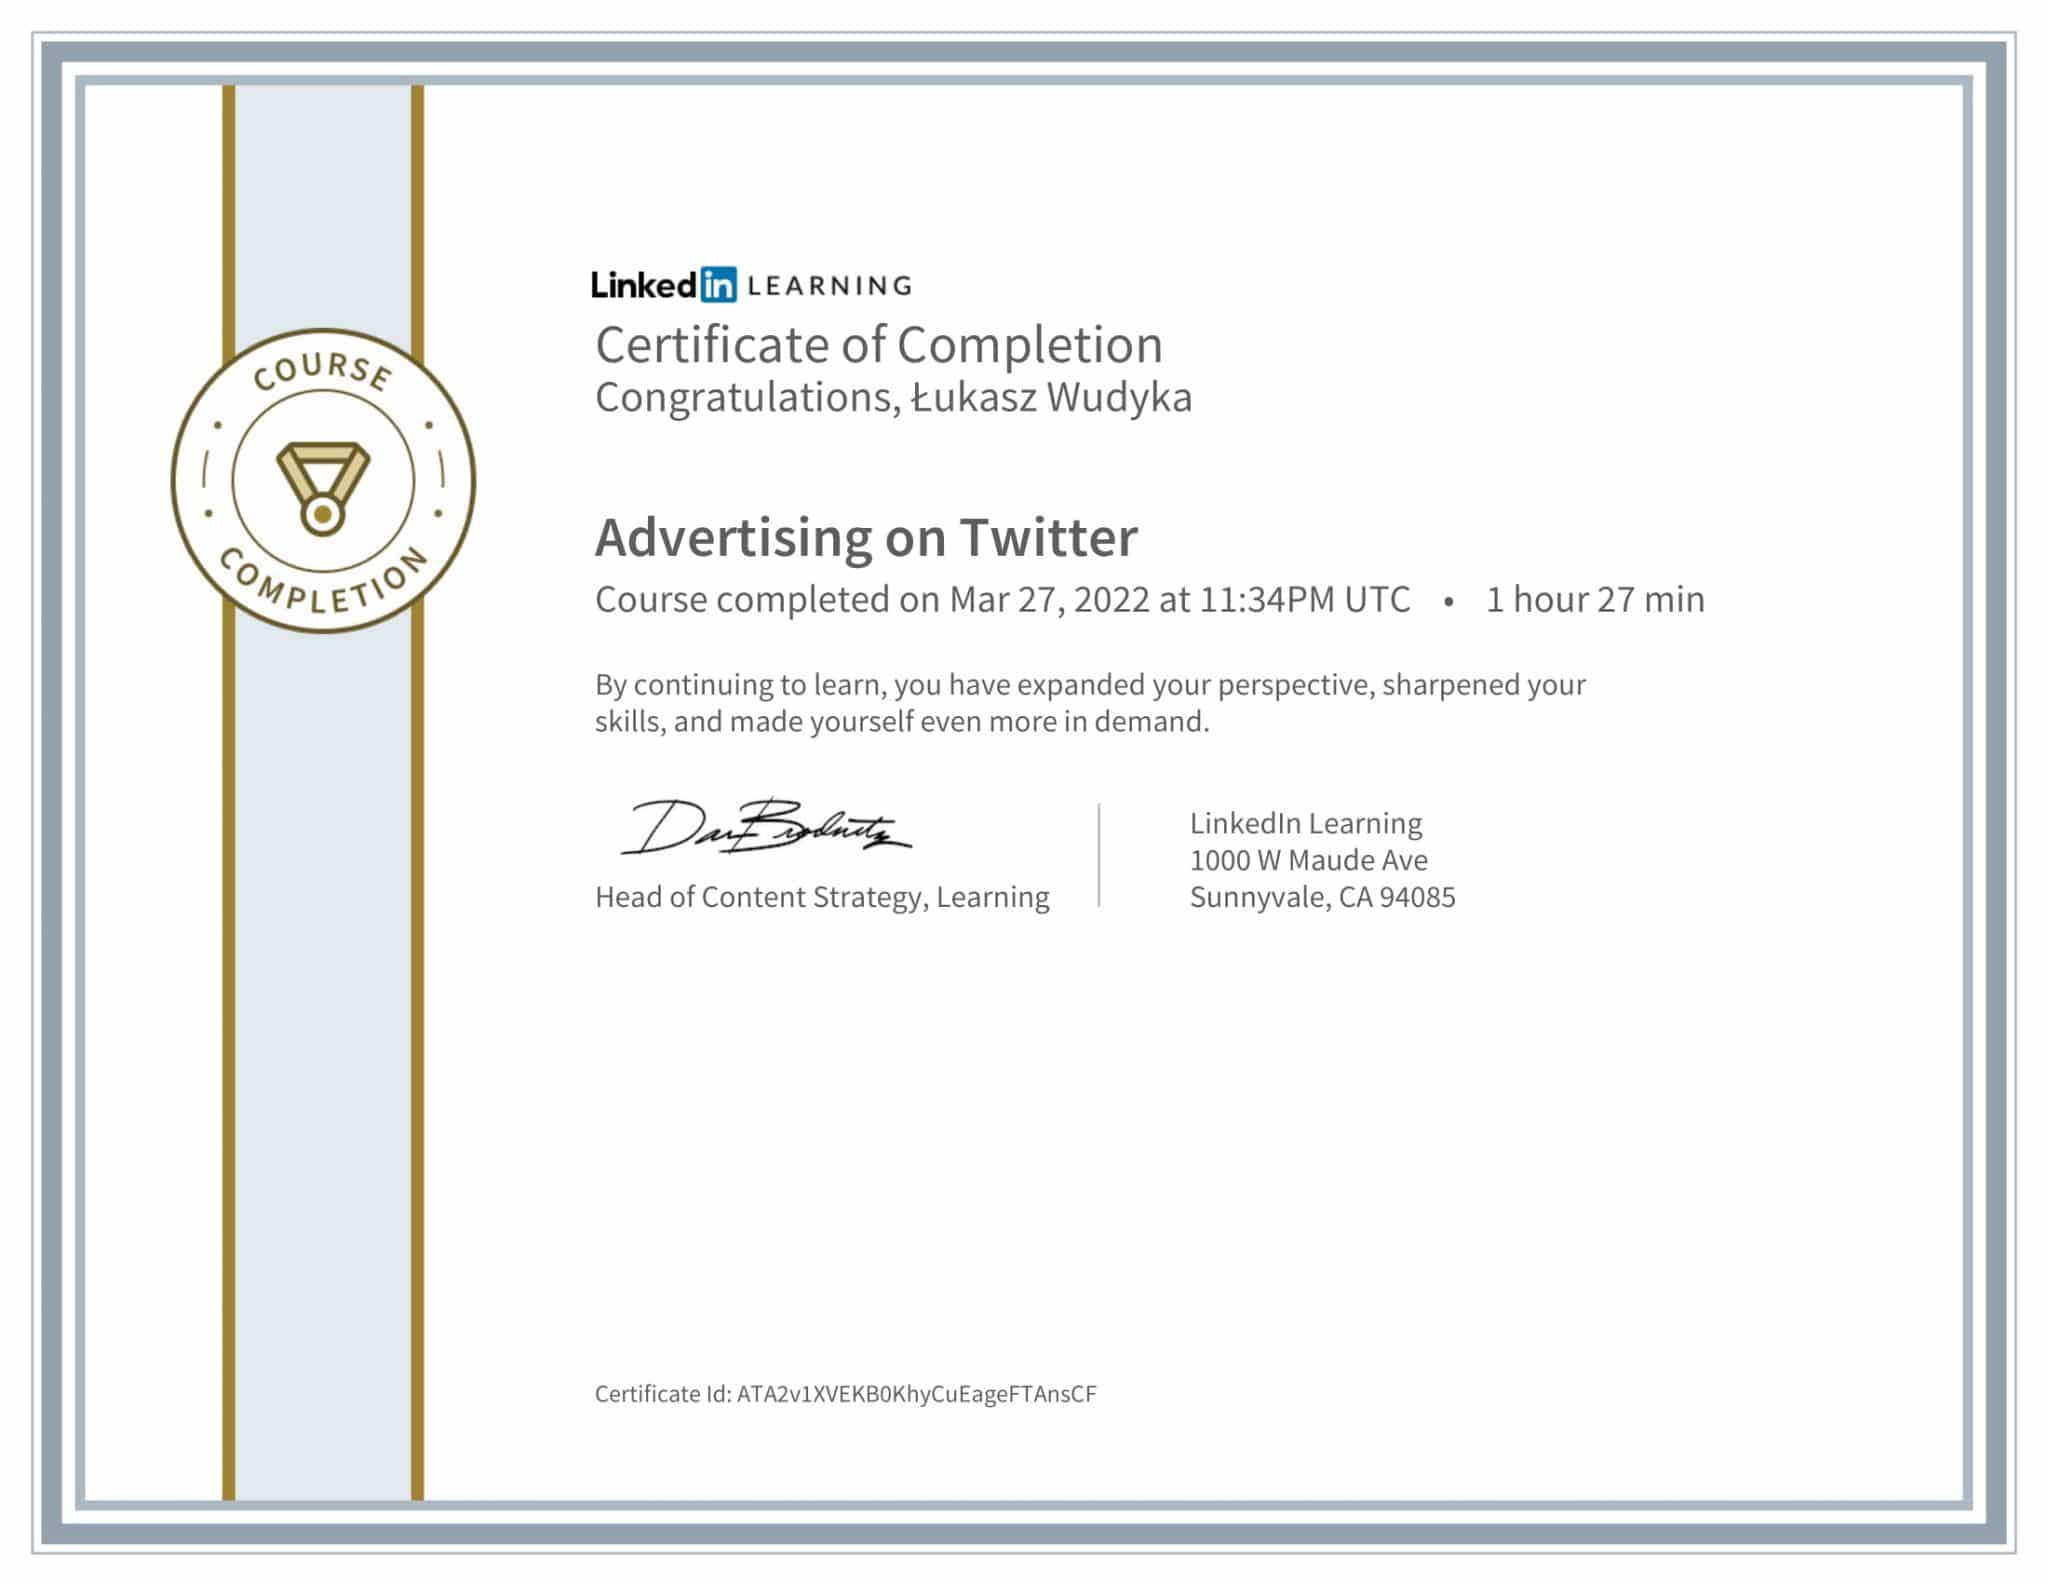 CertificateOfCompletion_Advertising on Twitter-1